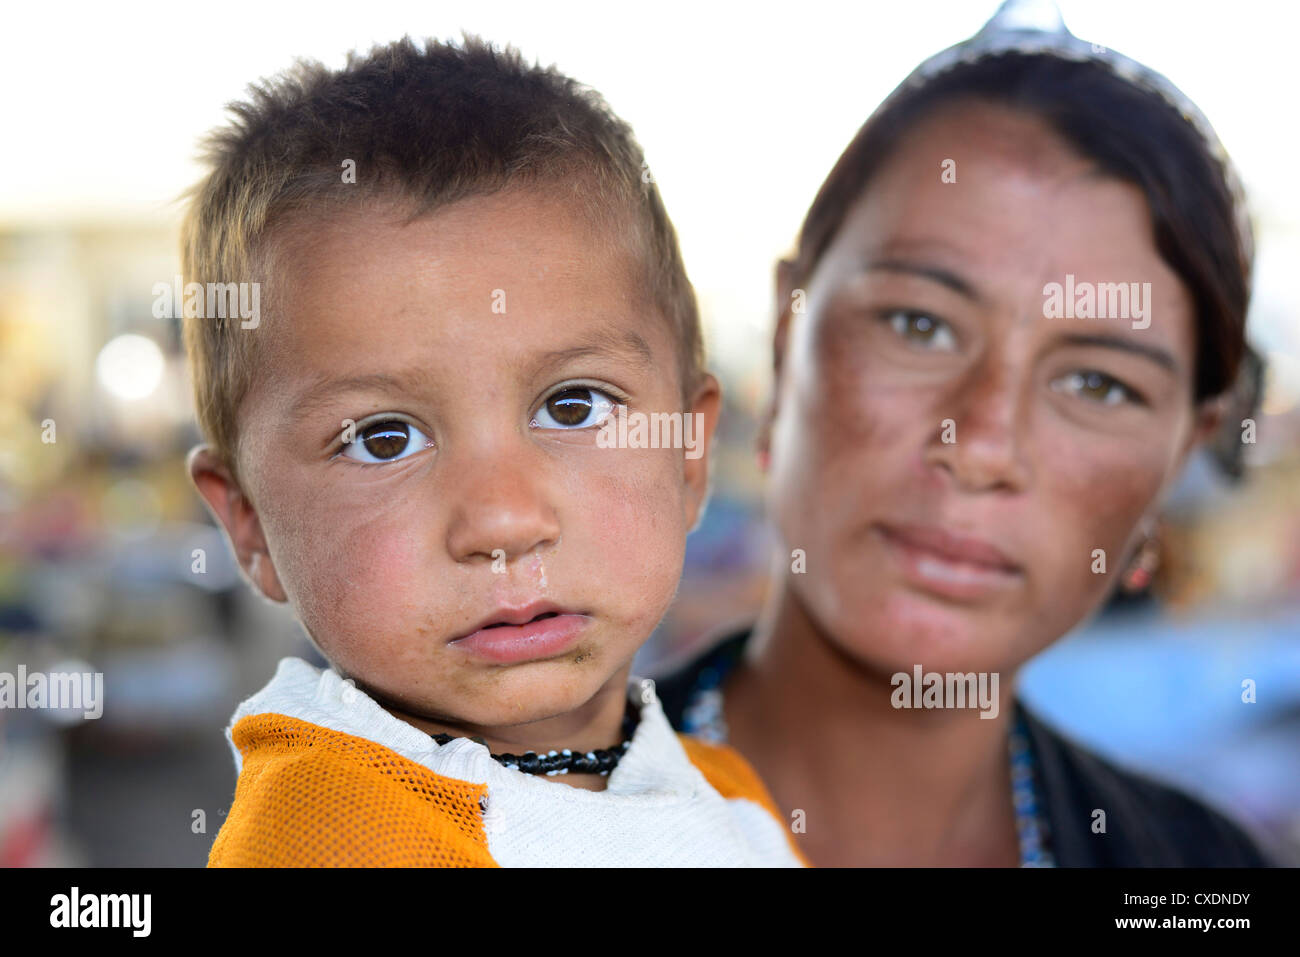 A Gypsy woman with her baby Stock Photo - Alamy